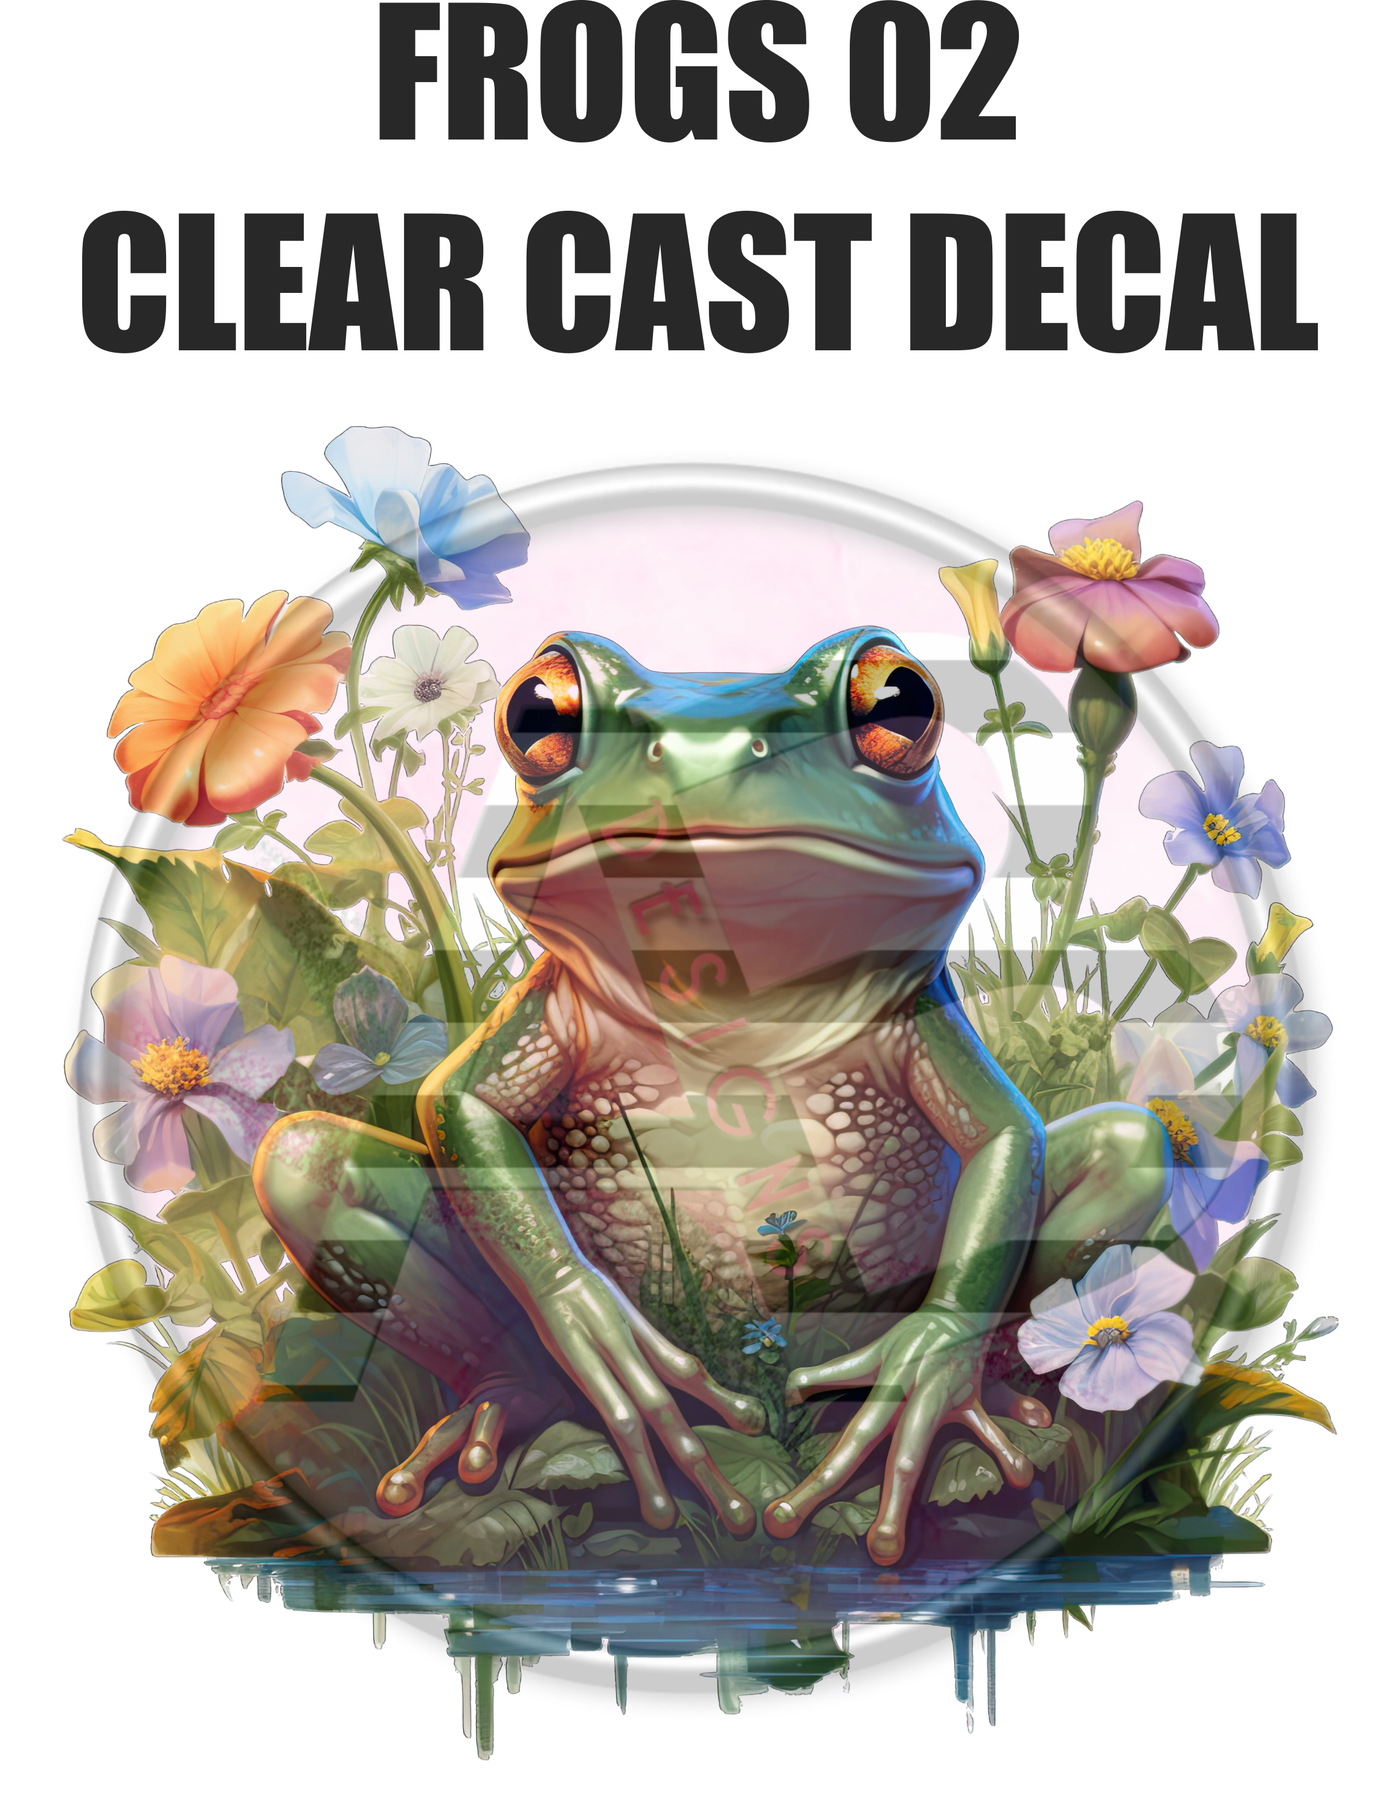 Frogs 02 - Clear Cast Decal - 148